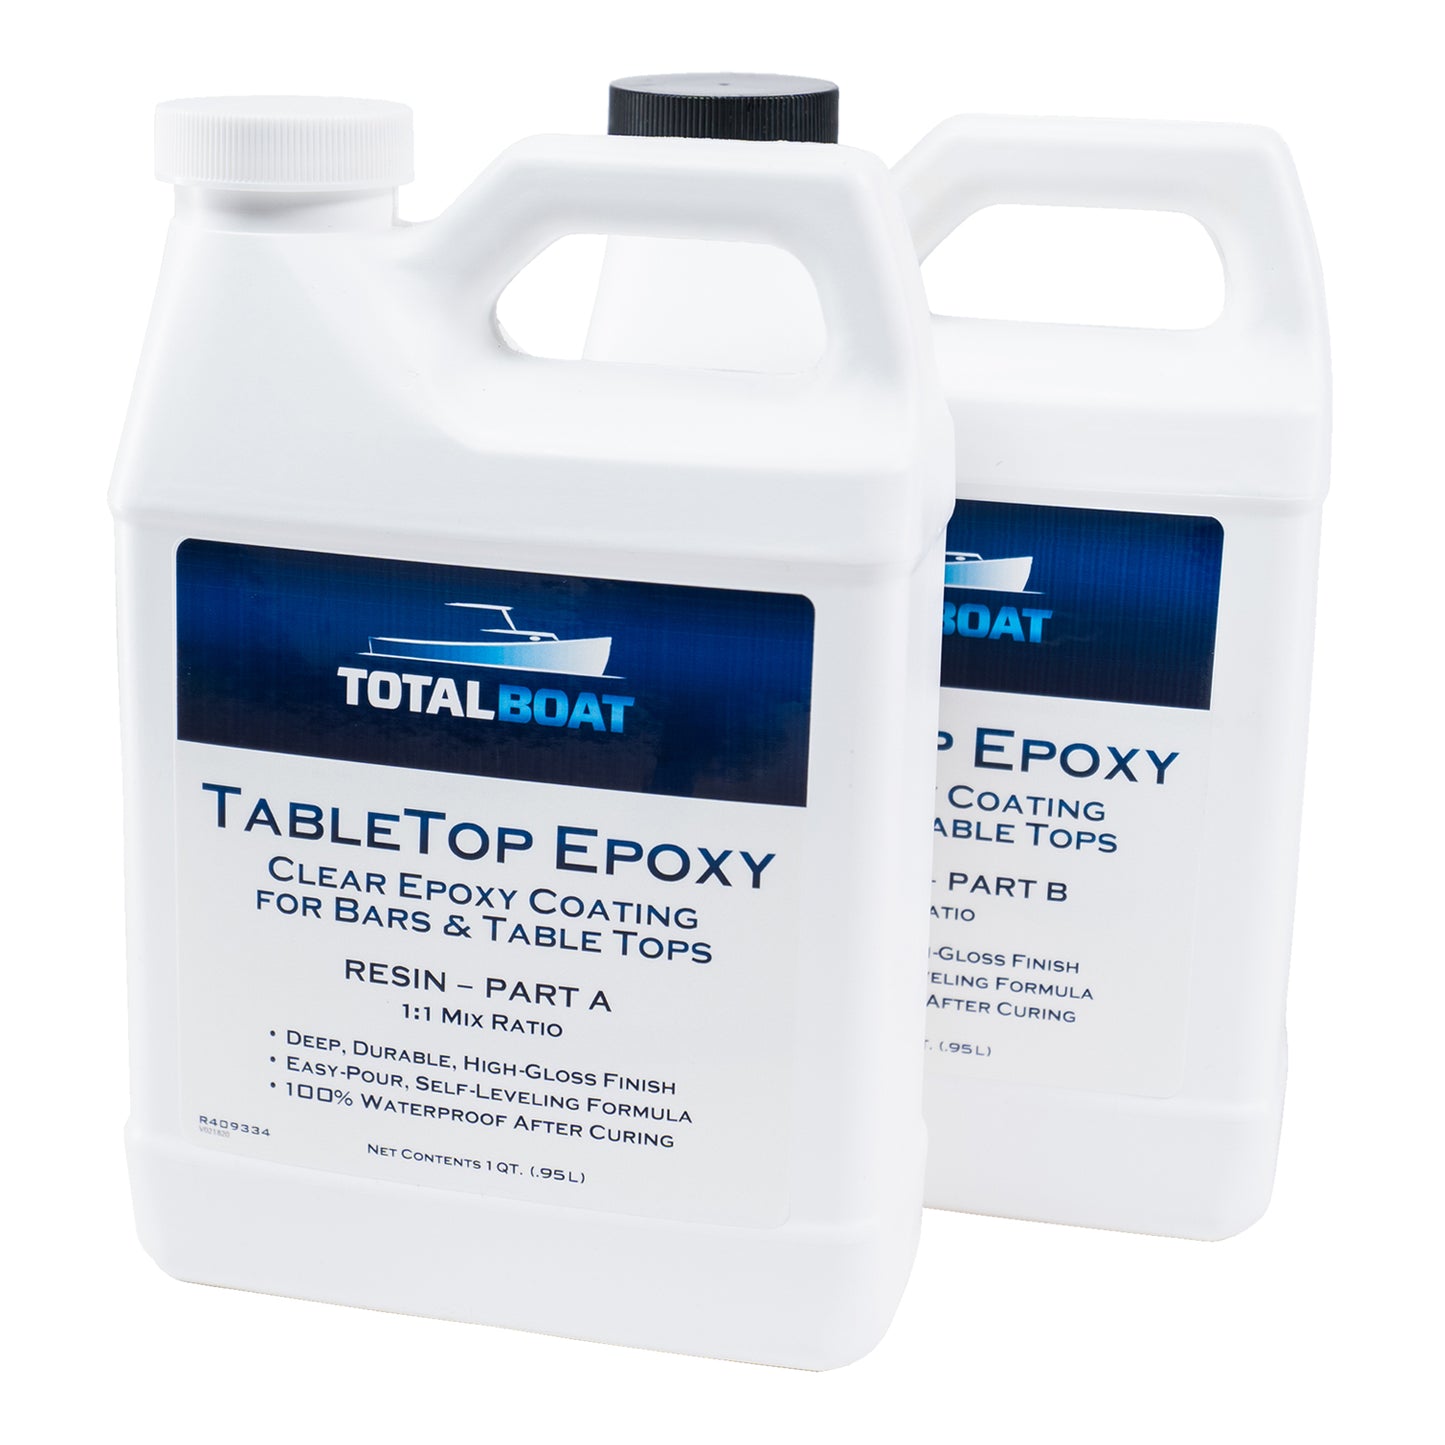 Fiberglass Coatings Table Top Epoxy Adhesive - Stainable, UV Resistant,  Interior Use - 2-Part Resin for Furniture & Home Decor - Waterproof, Heat